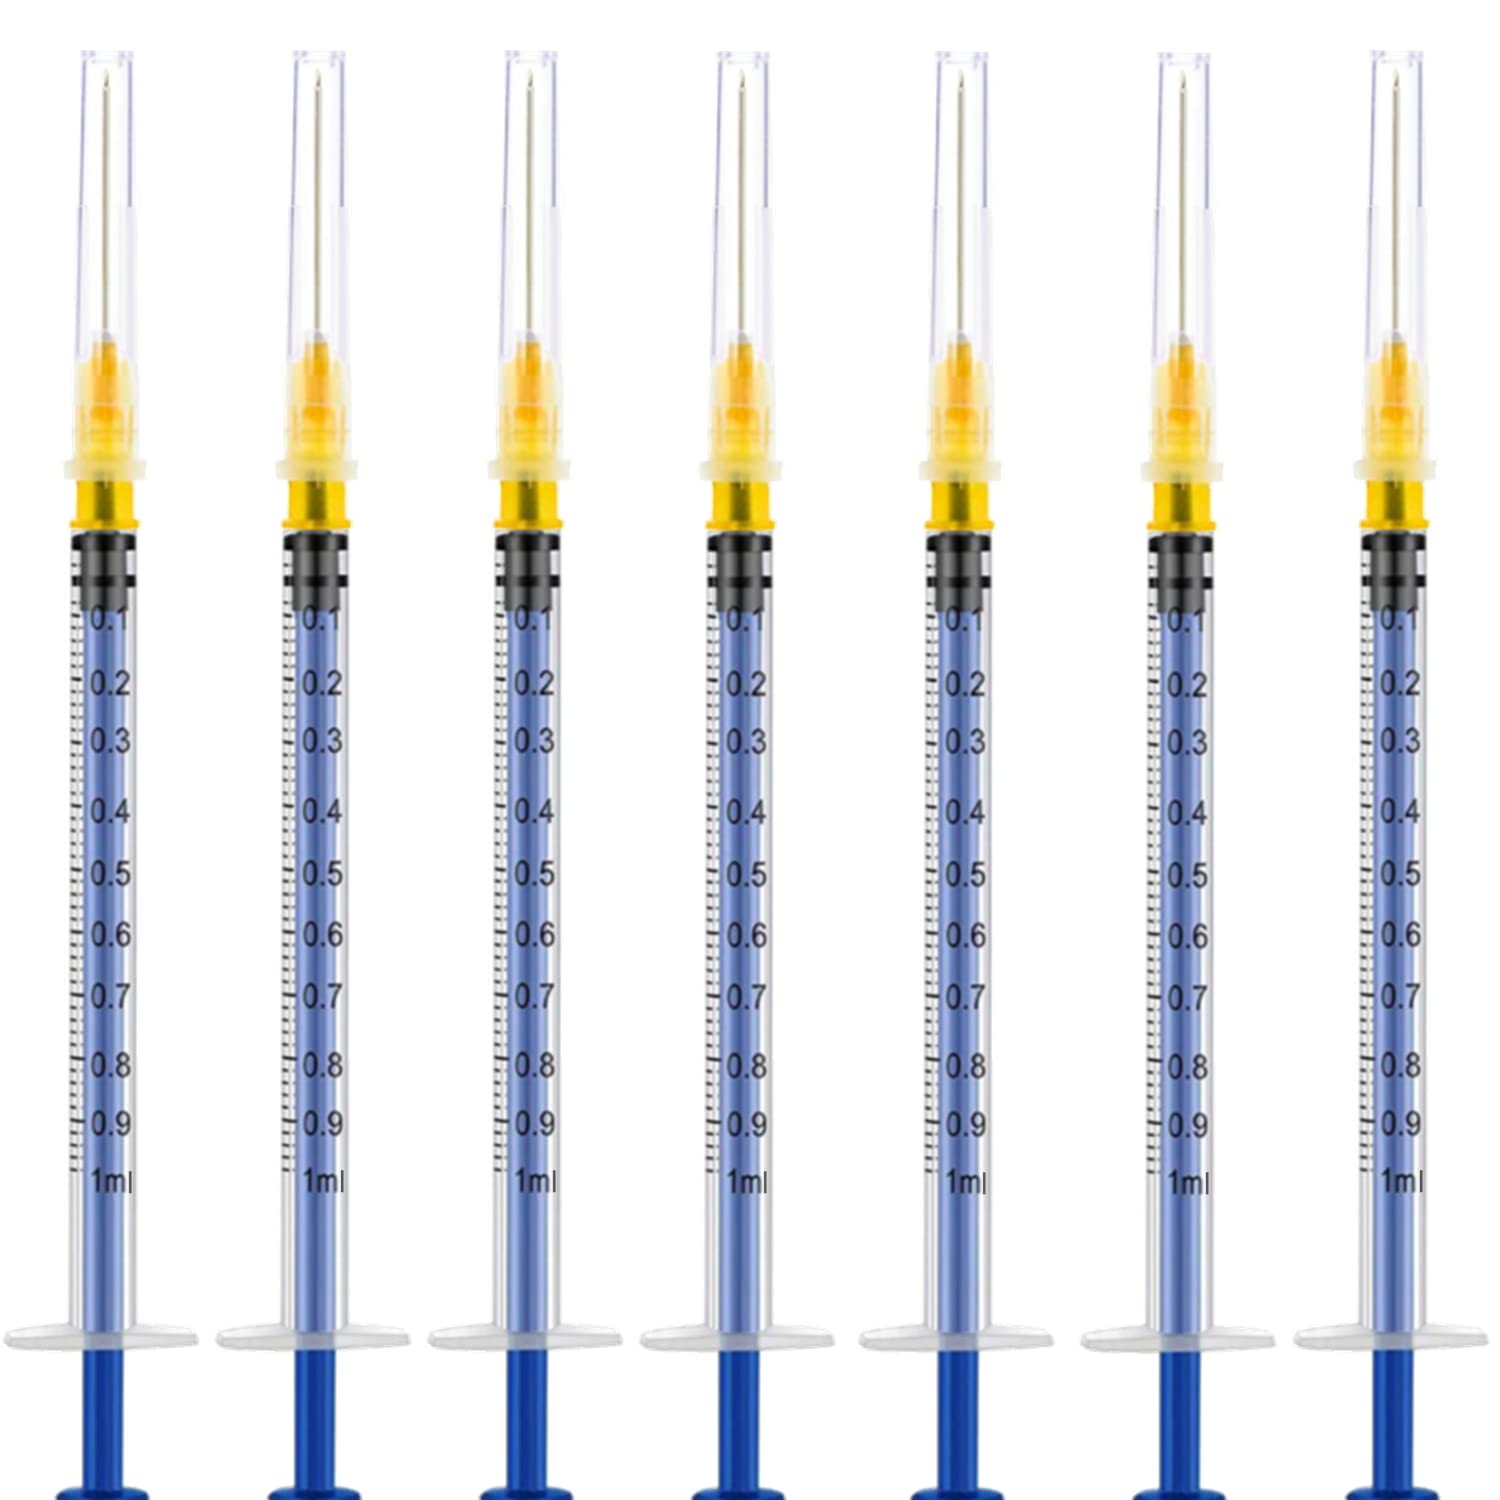 100 Pack 1ml 25Ga Plastic Syringe with Measurement for Scientific Labs, Industrial Dispensing Animal and Pet Supplies, Disposable Individually Wrapped (100, 1ml 25Ga)